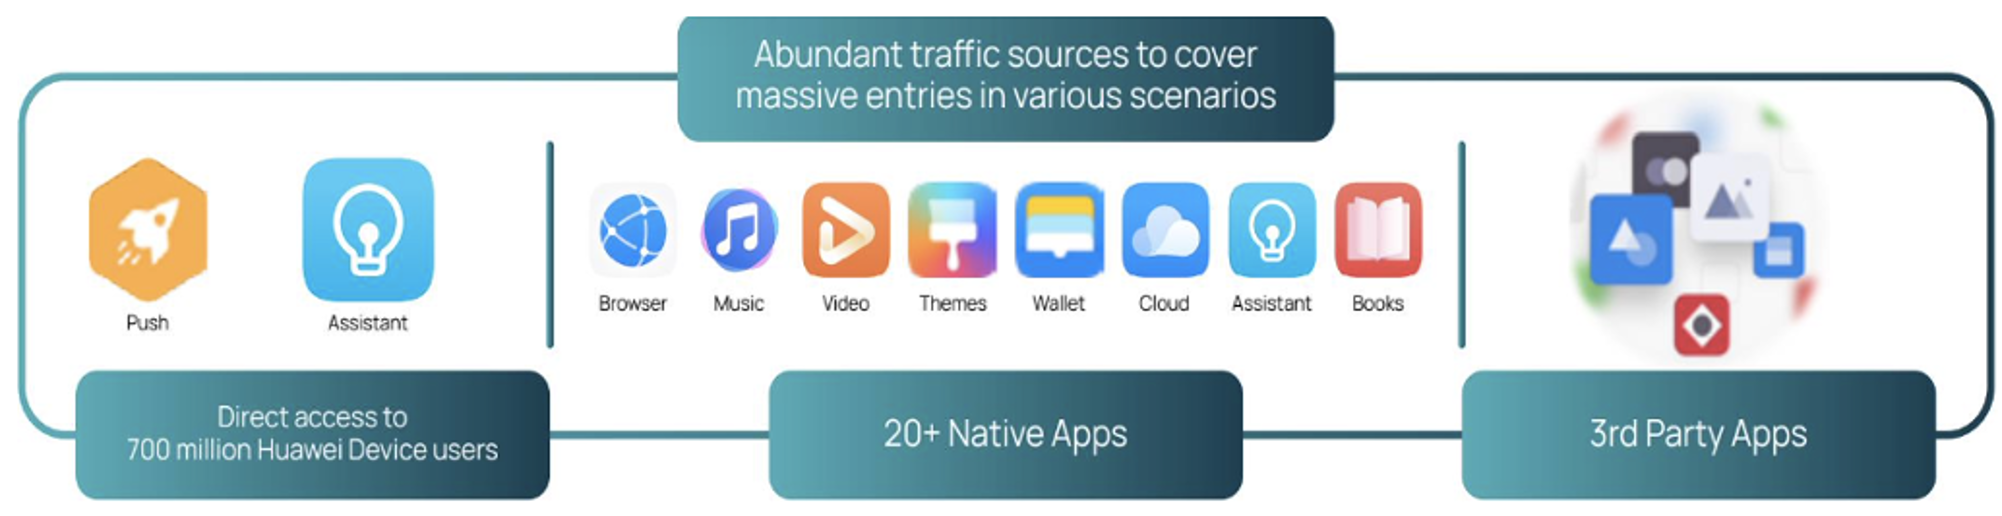 Huawei-Ads_traffic-resources